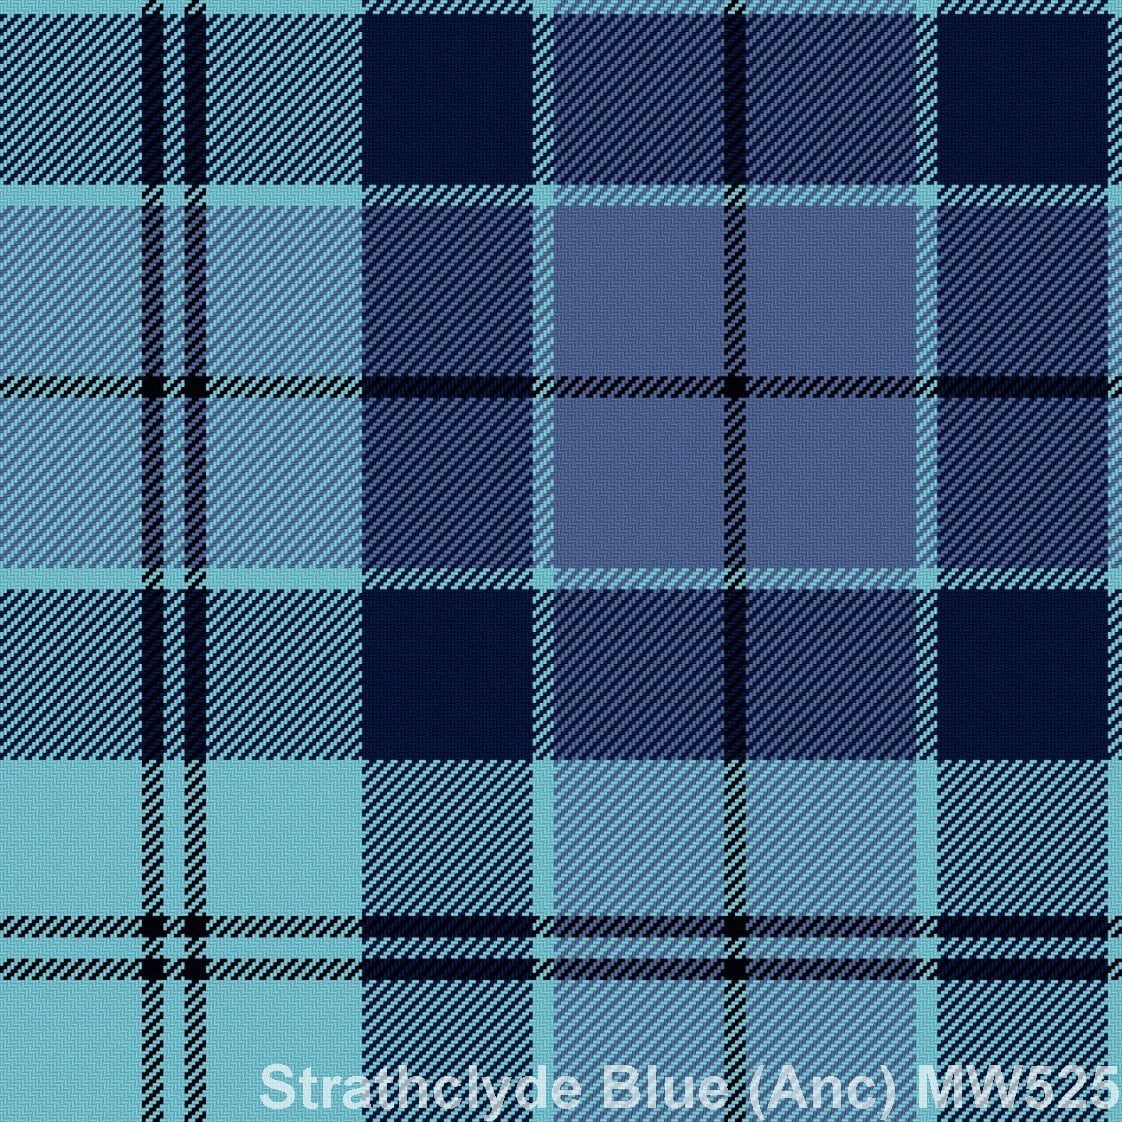 Strathclyde Blue Ancient